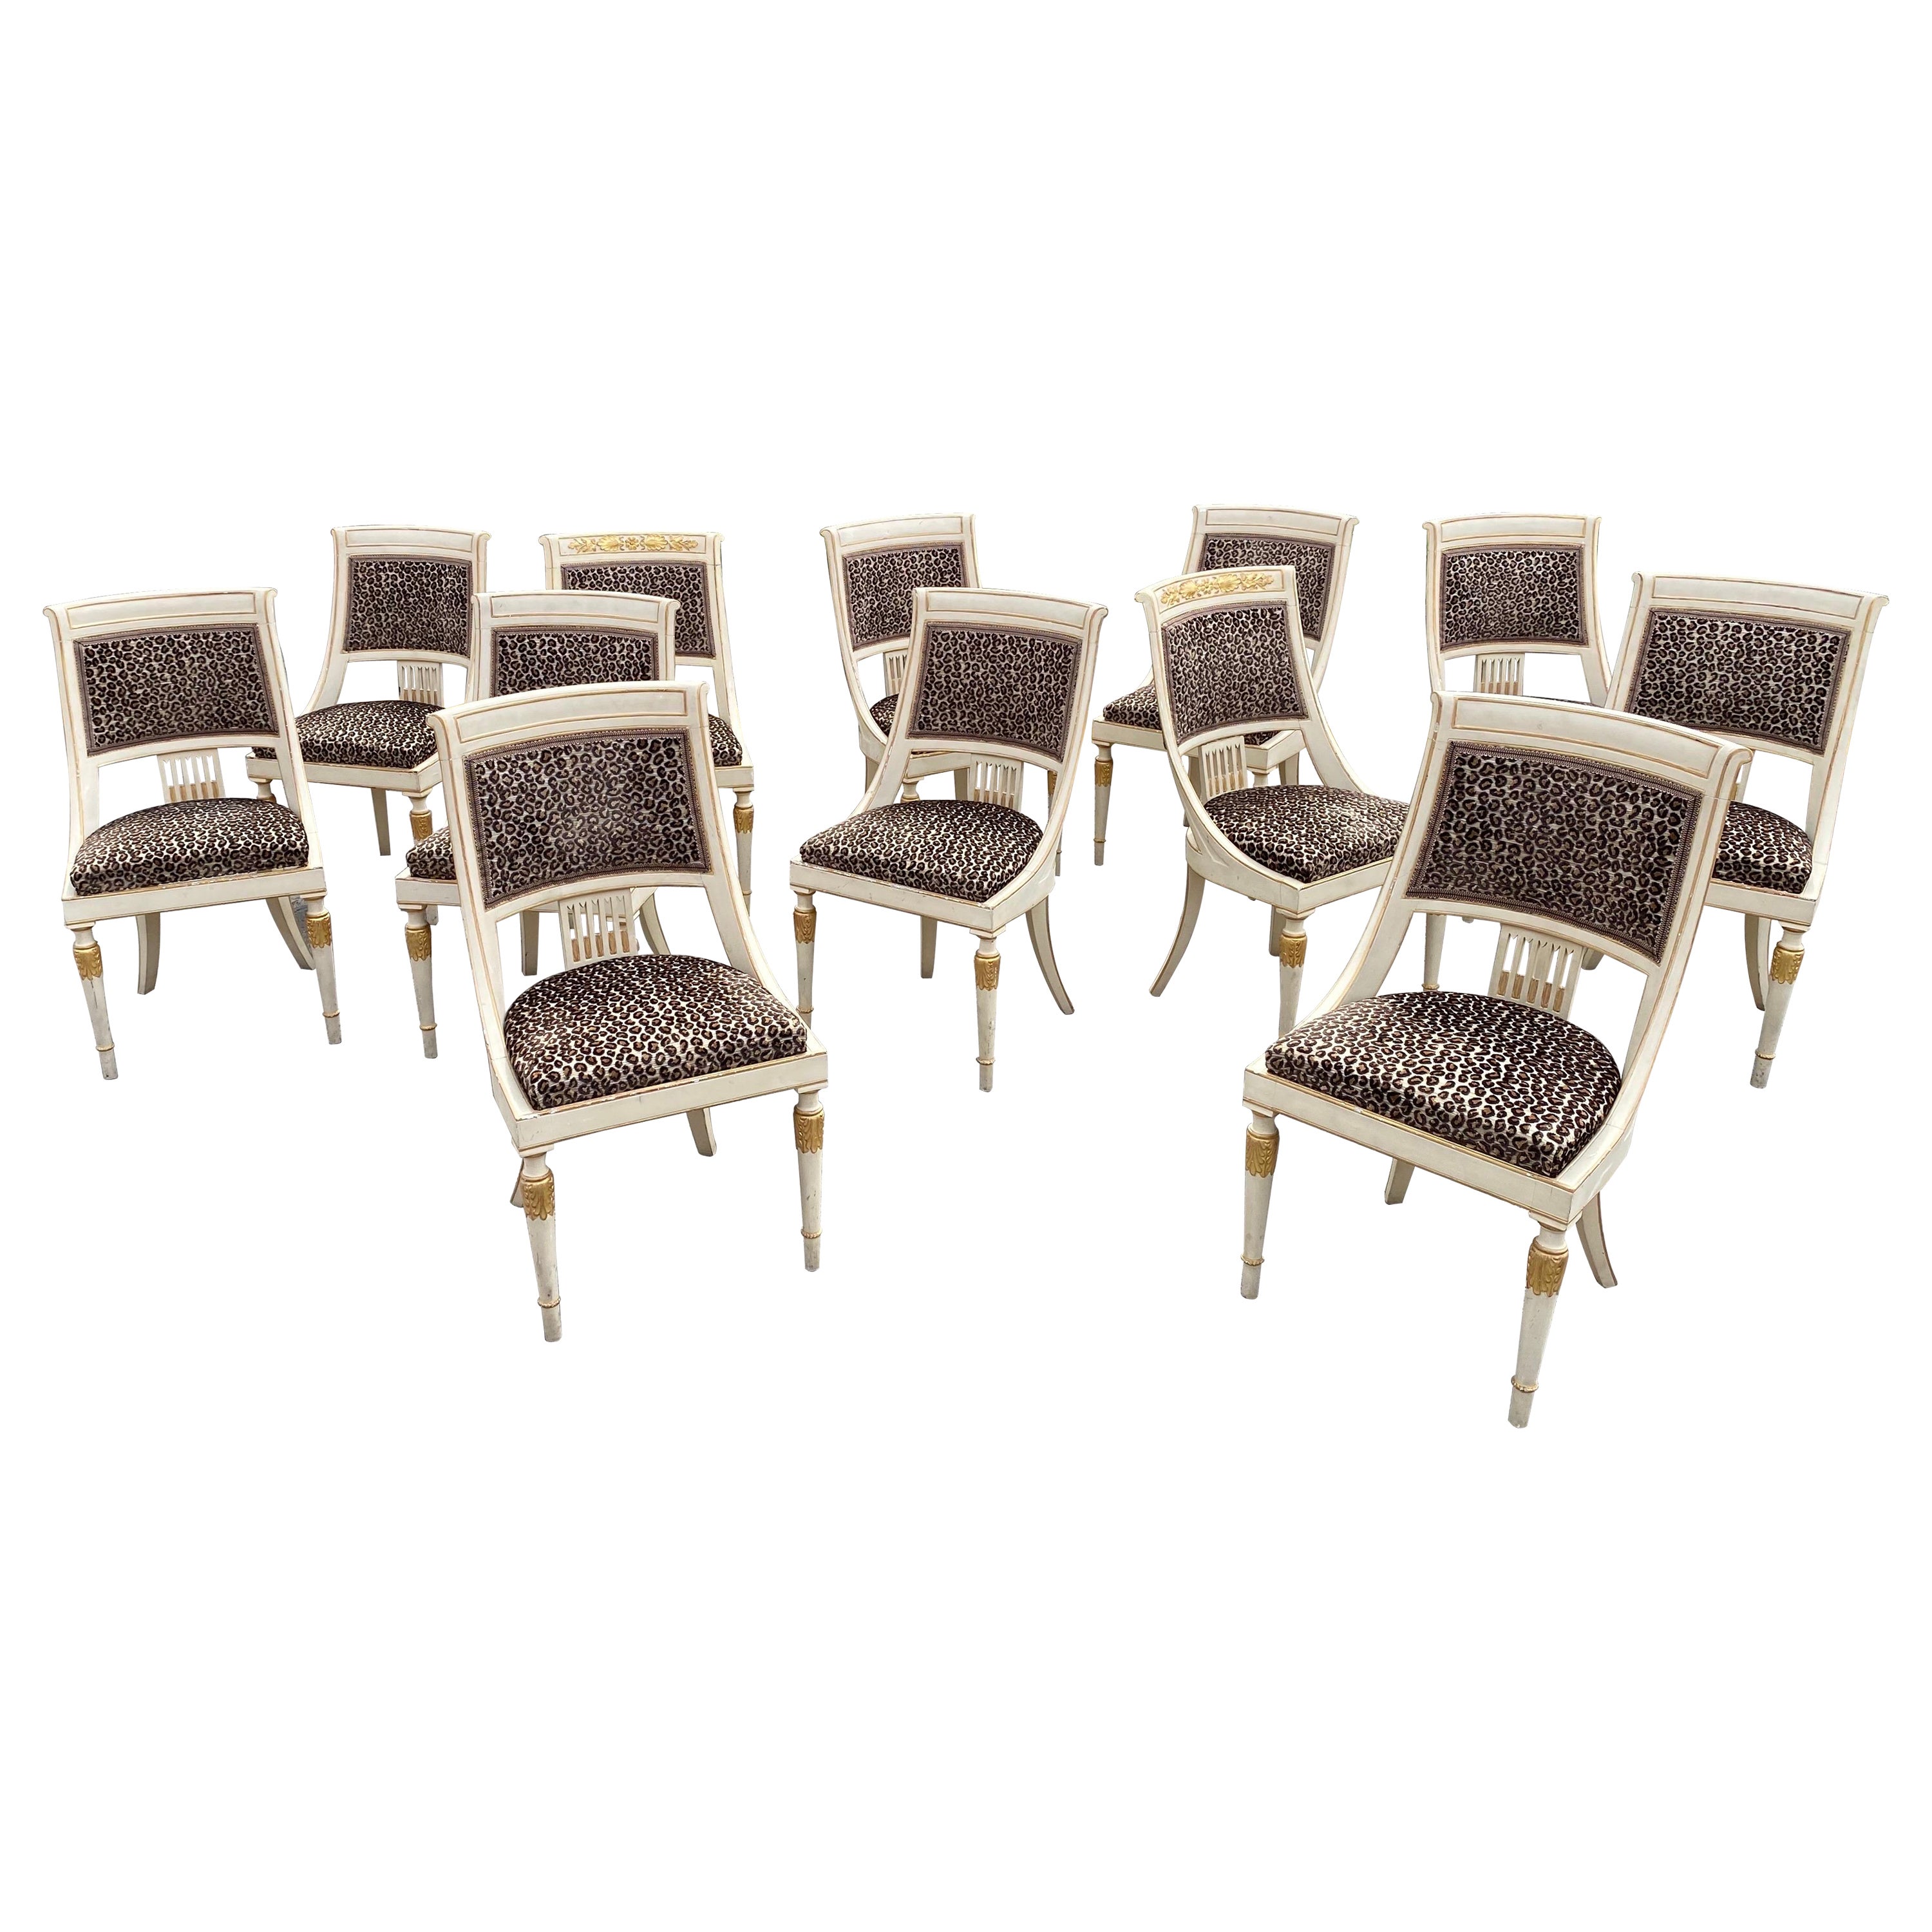 Suite of 12 Empire Style Chairs circa 1970/1980 in the Style of Maison Romeo